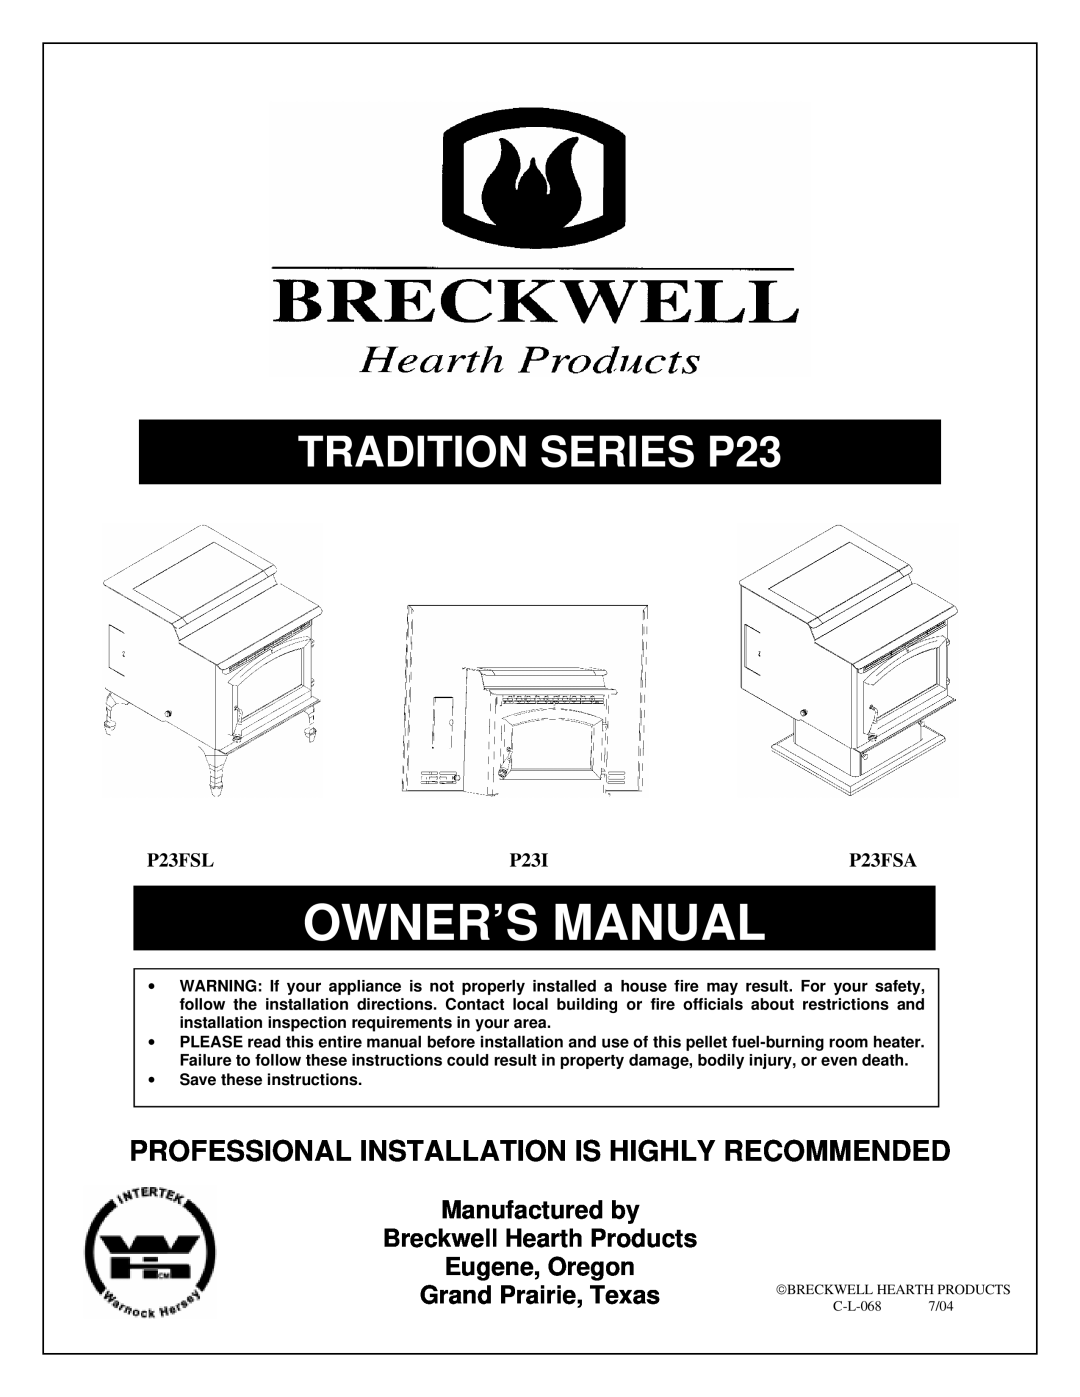 Breckwell P23FSA owner manual TRADITION SERIES P23, Professional Installation Is Highly Recommended, P23FSL, P23I 